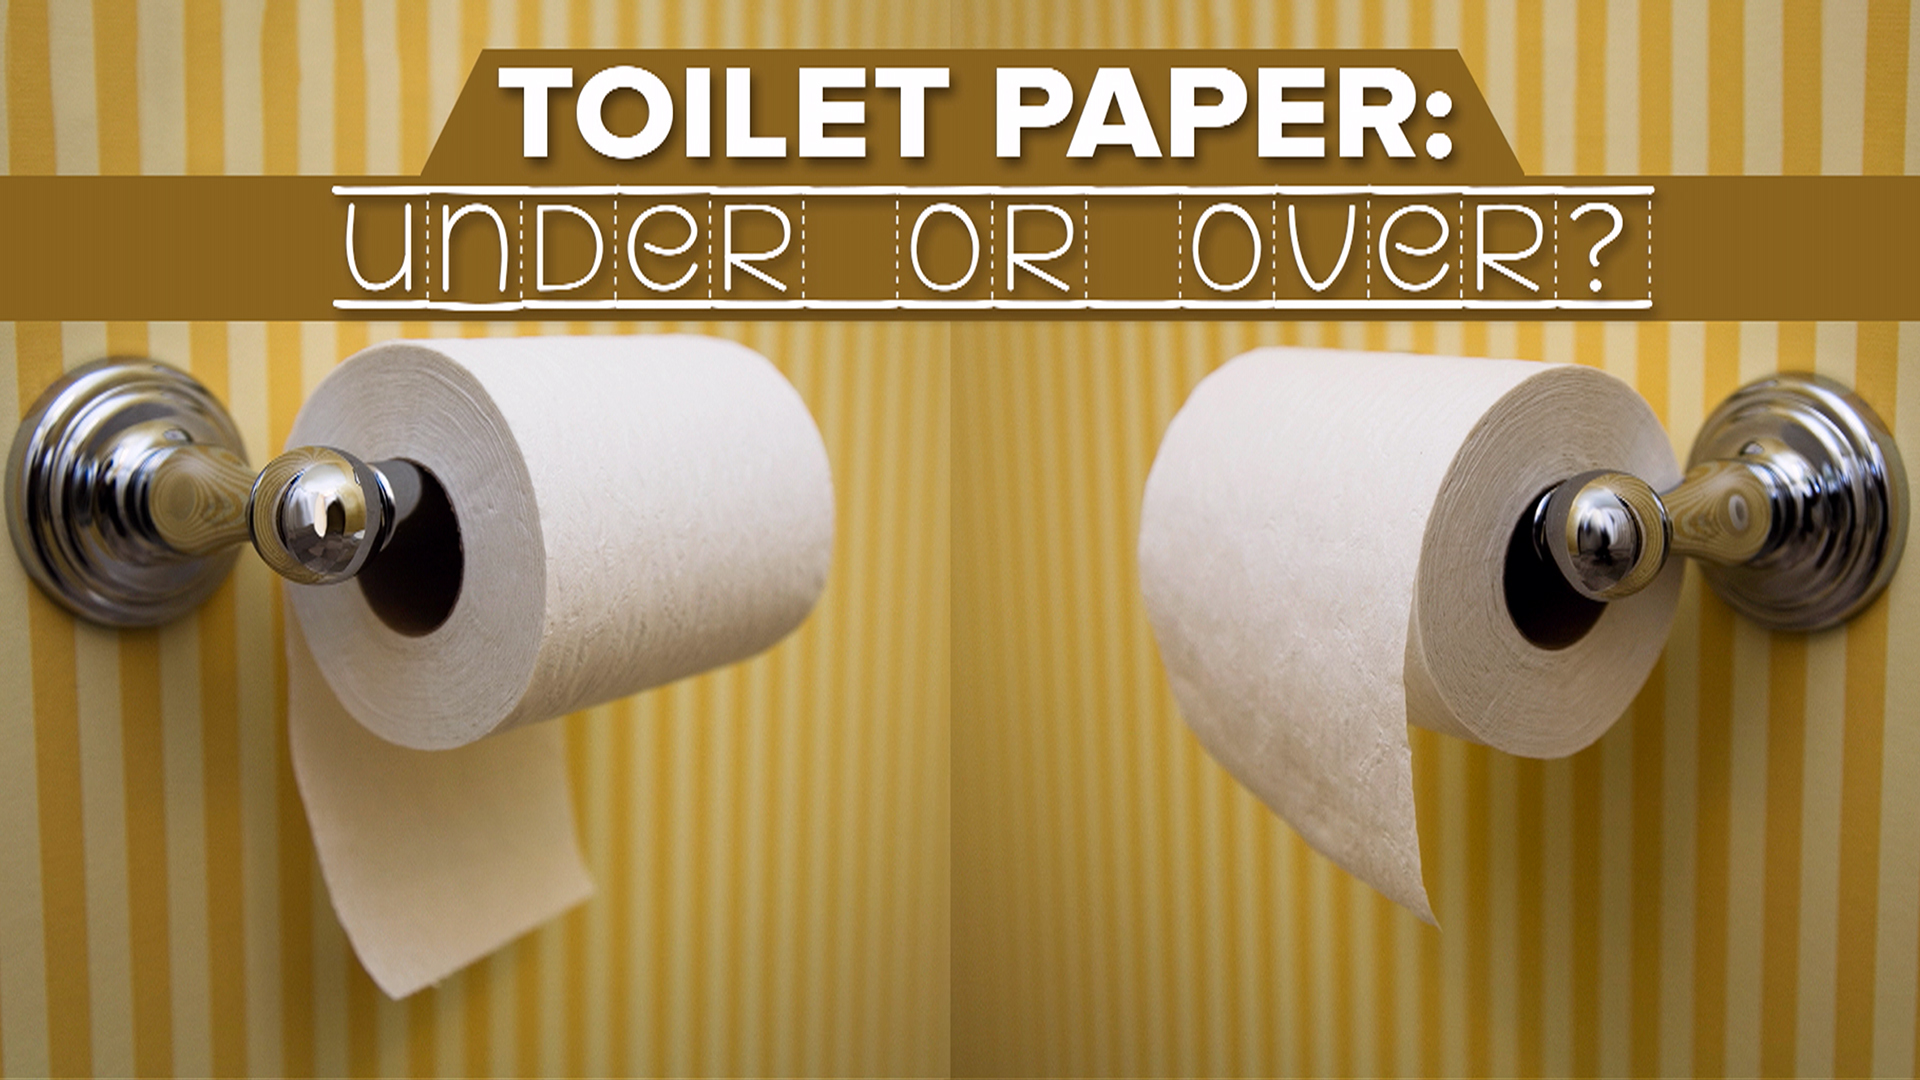 Toilet paper 'over or under' debate resolved via 1891 patent